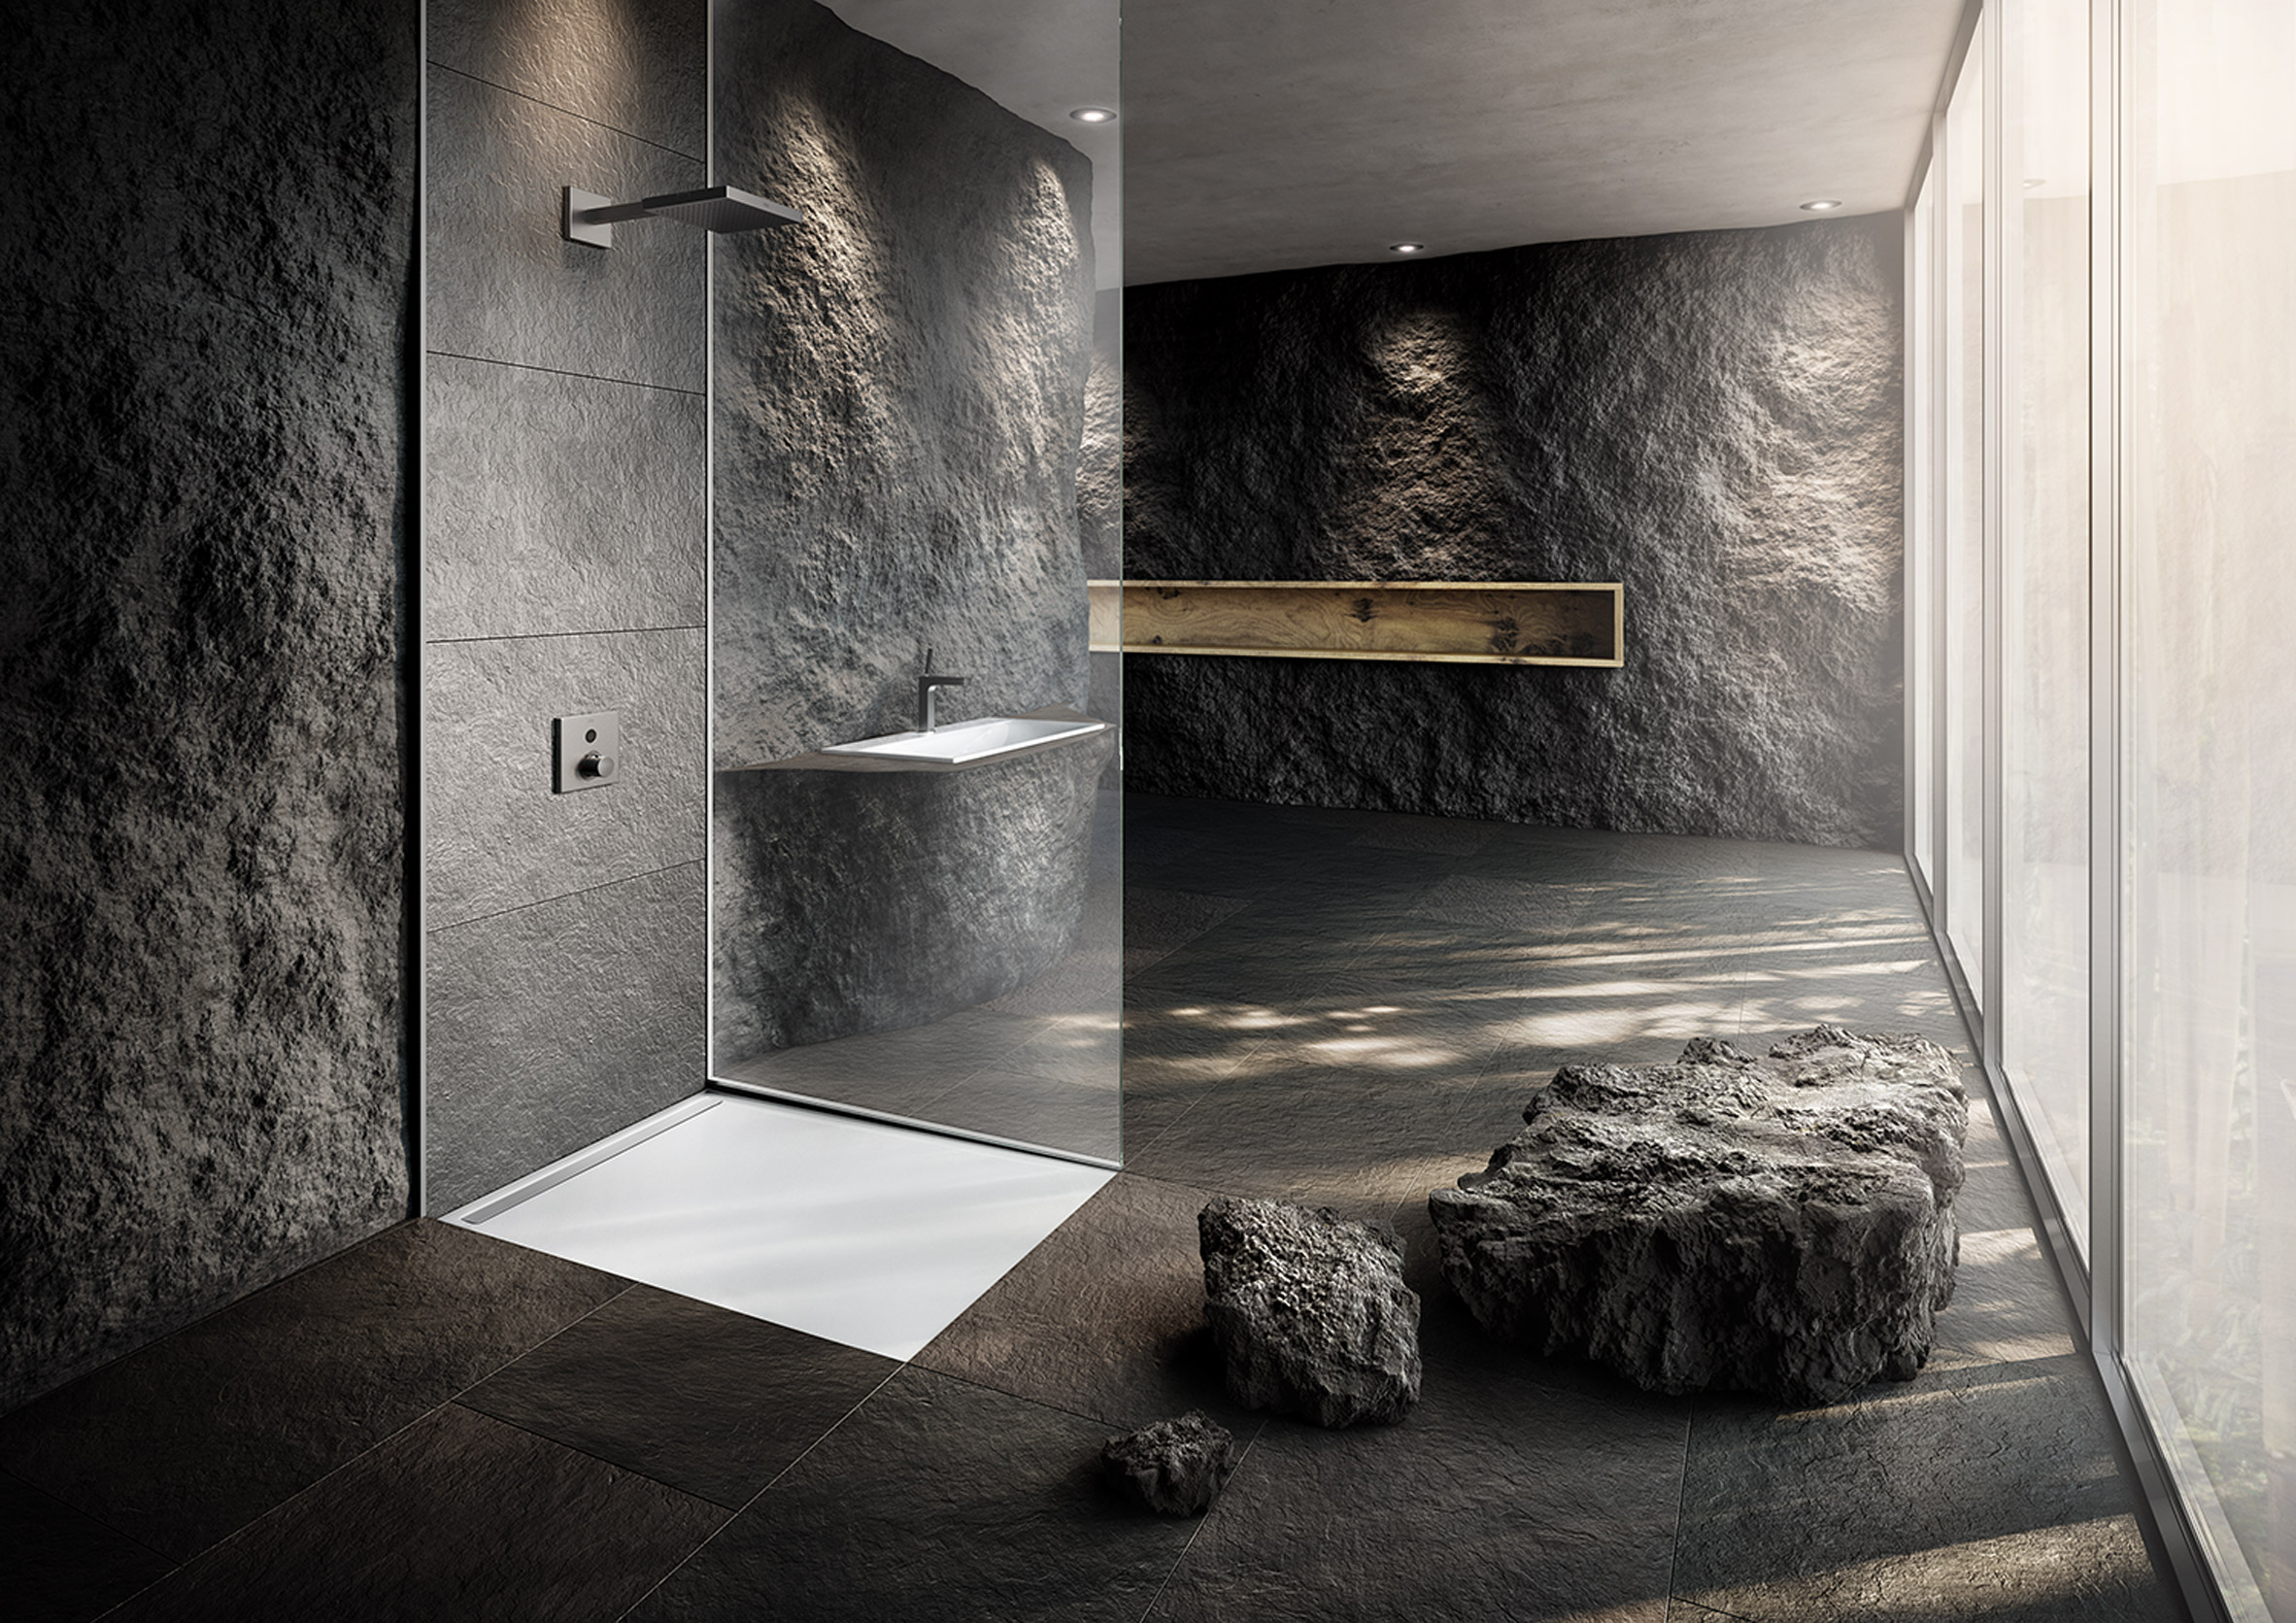 Kaldewei launches shower surfaces that sit level with your floor